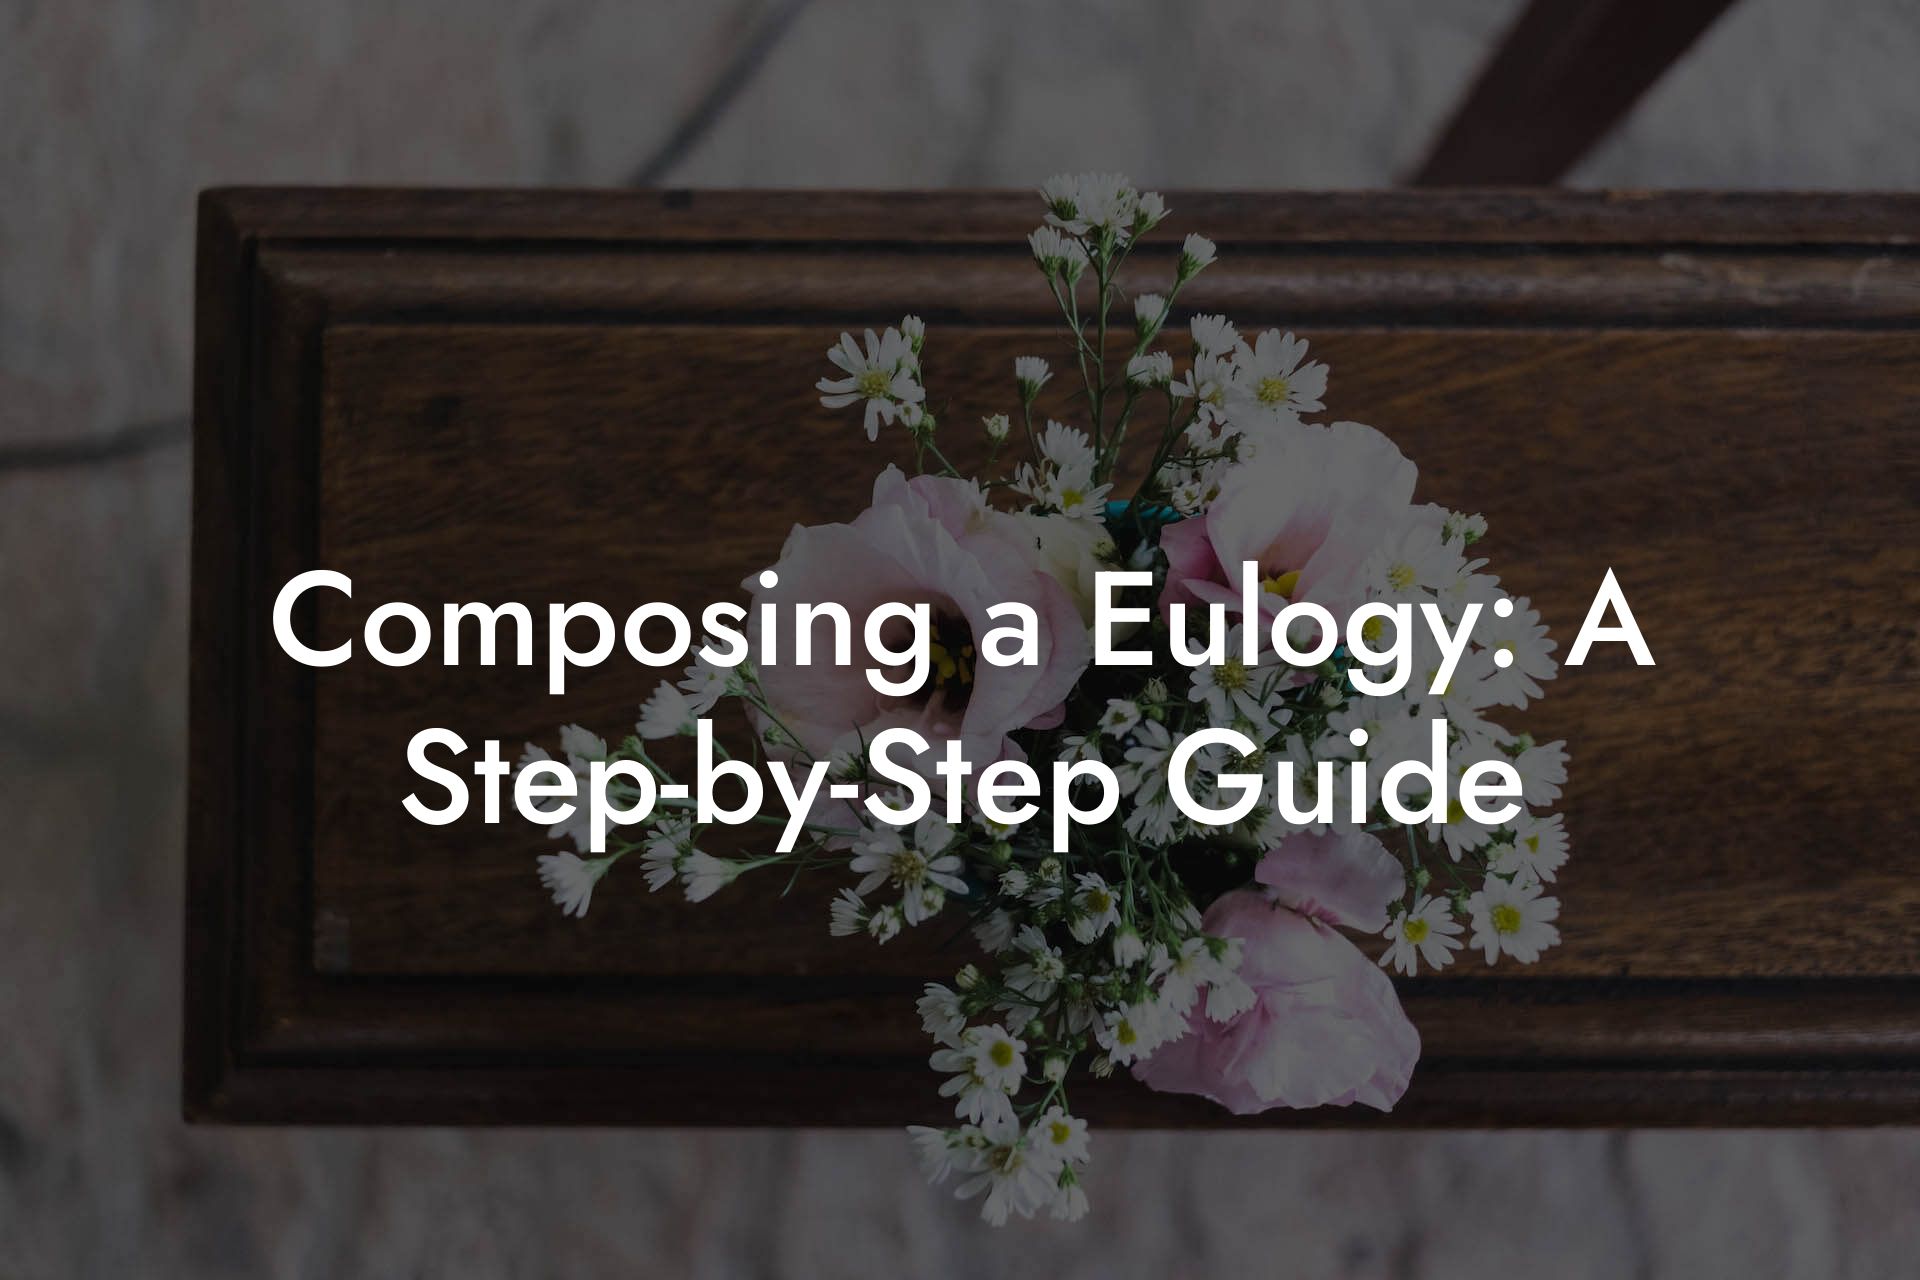 Composing a Eulogy: A Step-by-Step Guide